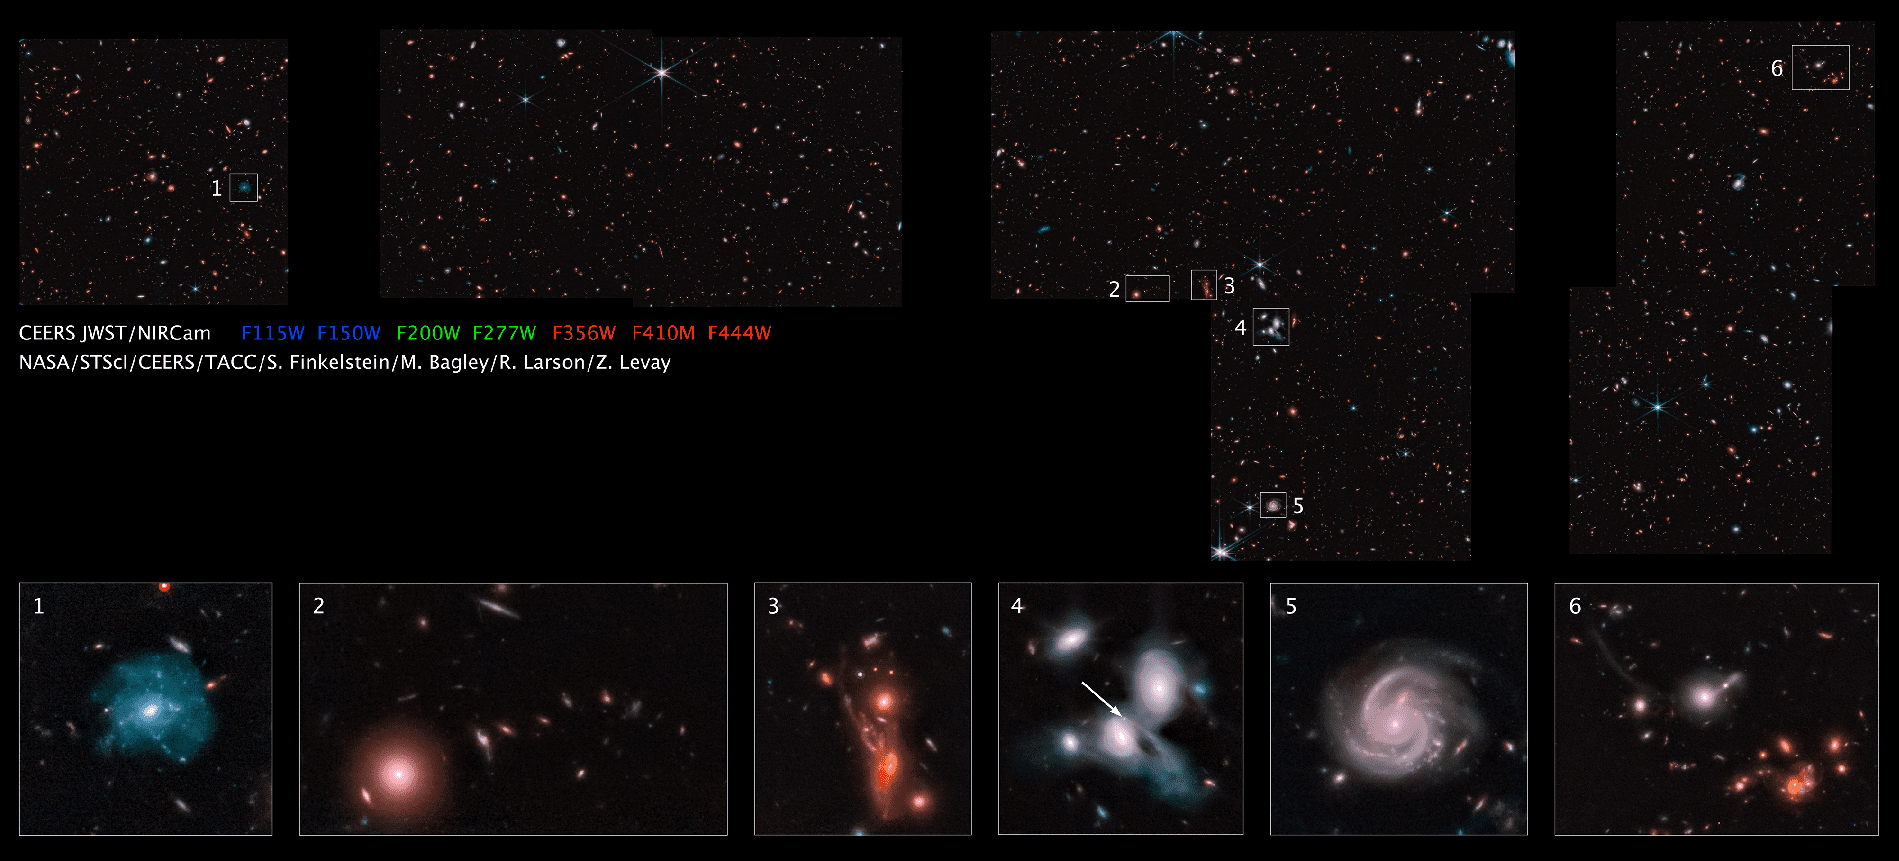 The CEERS Epoch 1 (above) is the largest image yet released by the JWST. Six relatively close and bright galaxies are shown in higher magnification